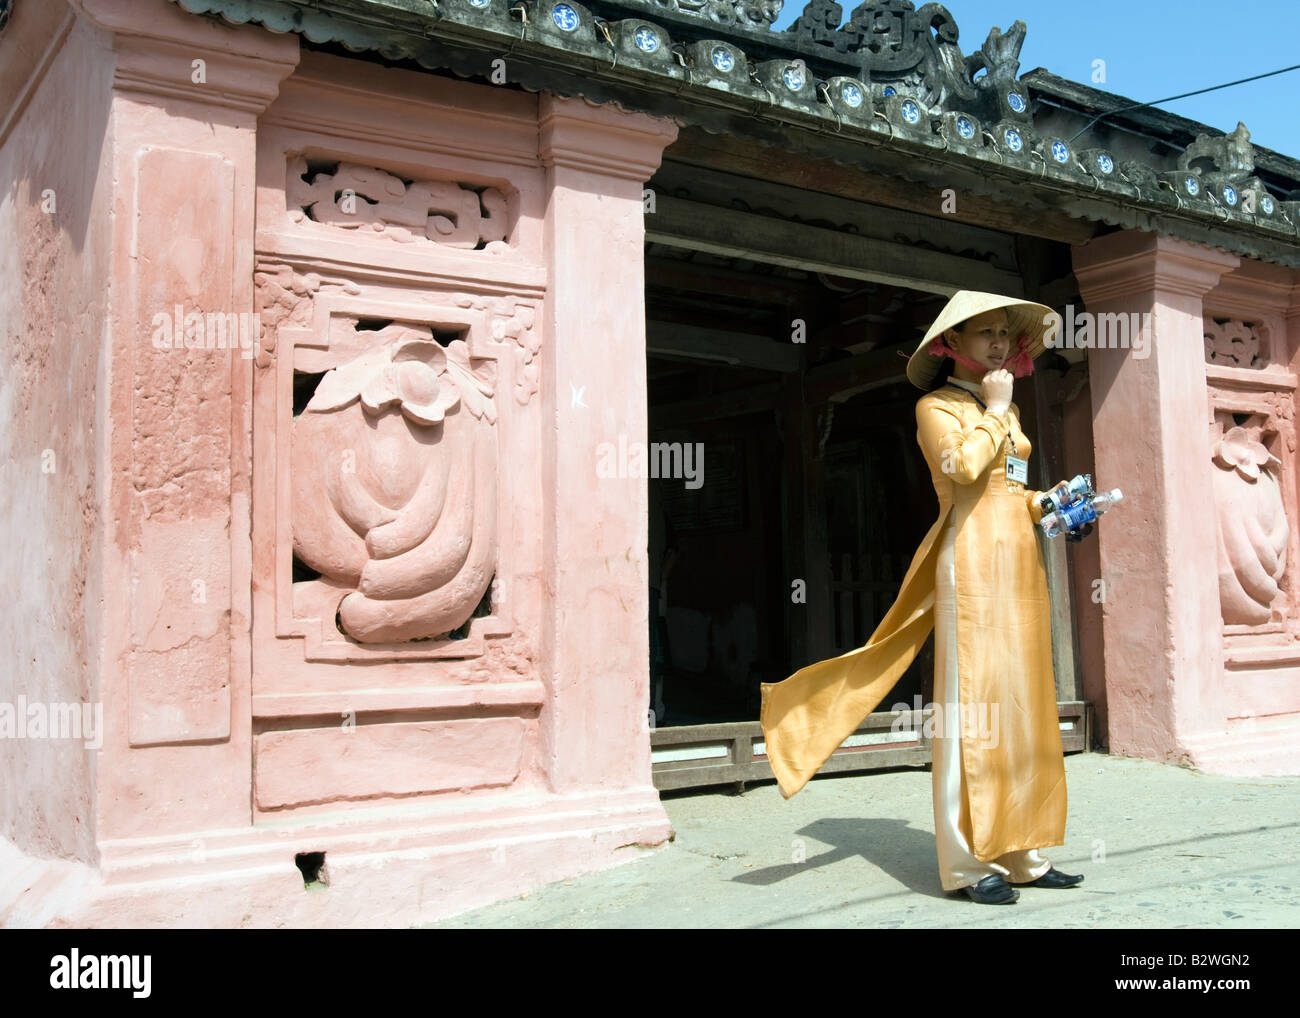 Conical hat in gold ao dai traditional costume landmark Japanese Covered Bridge Hoi An Vietnam Stock Photo